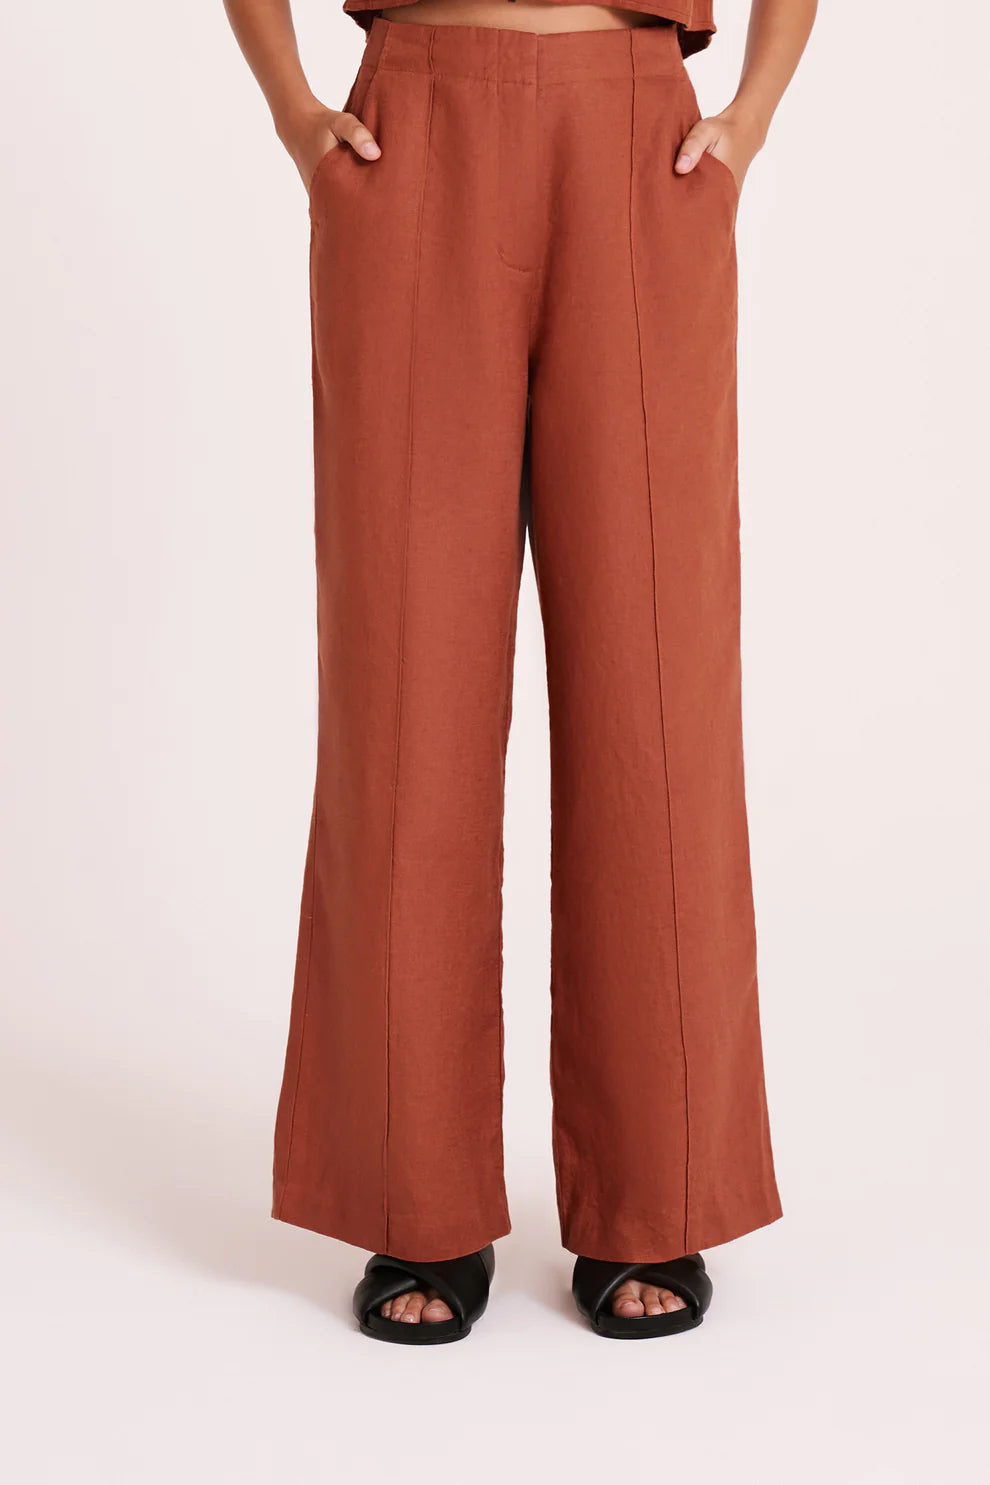 Nude Lucy Amani Tailored Linen Pant - Amber